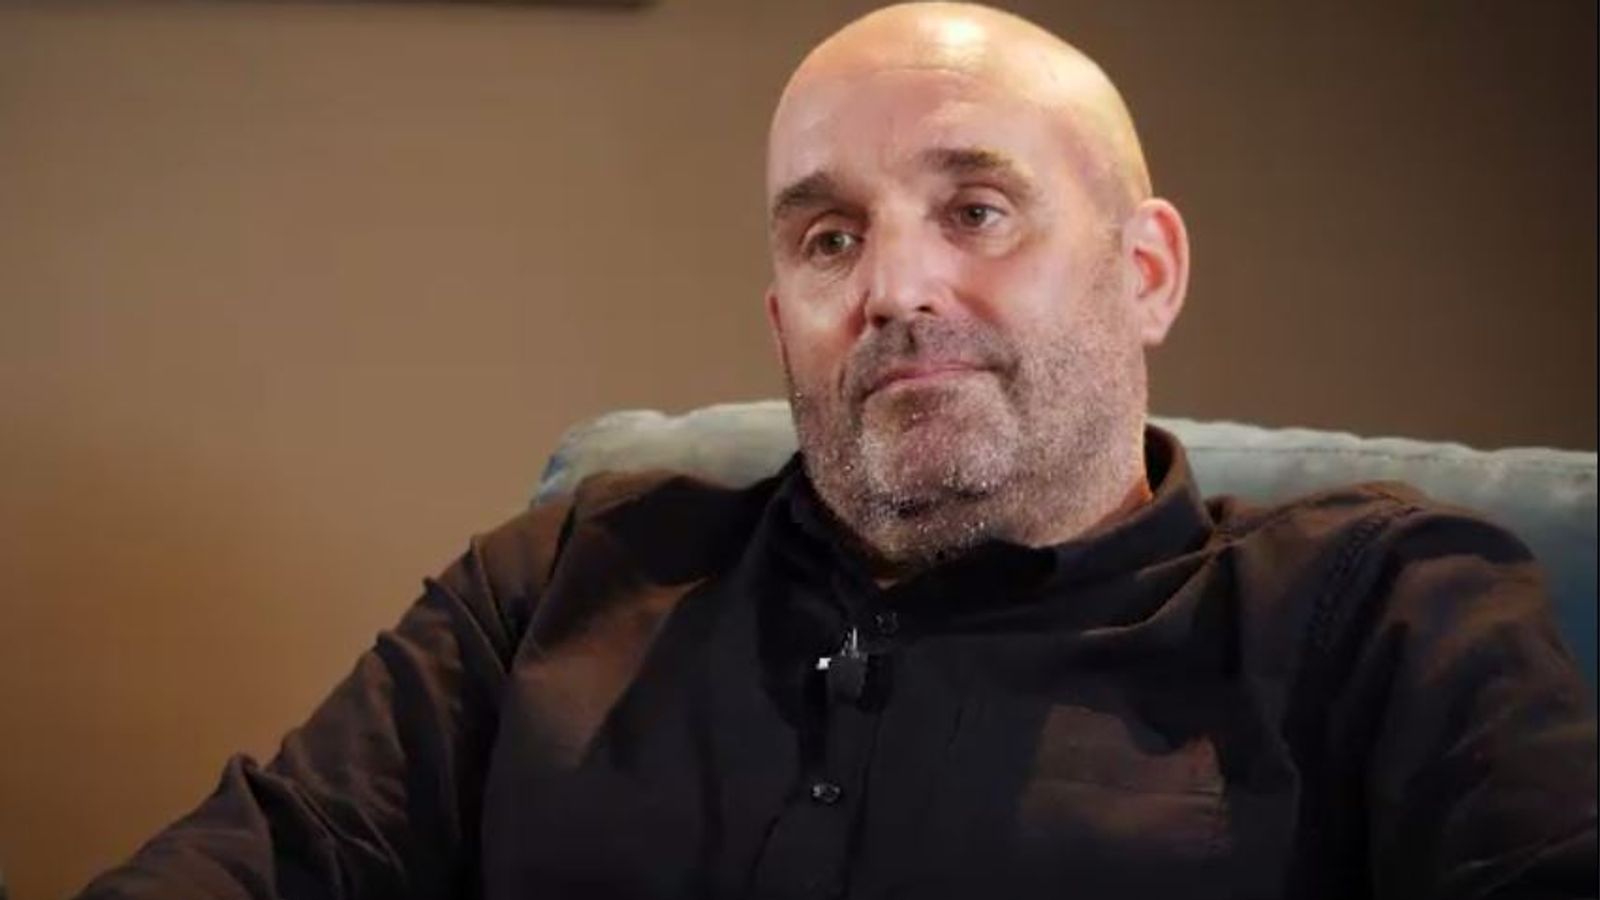 Shane Meadows: Prison might have led to better stories - or maybe I'd have ended up a really pathetic criminal